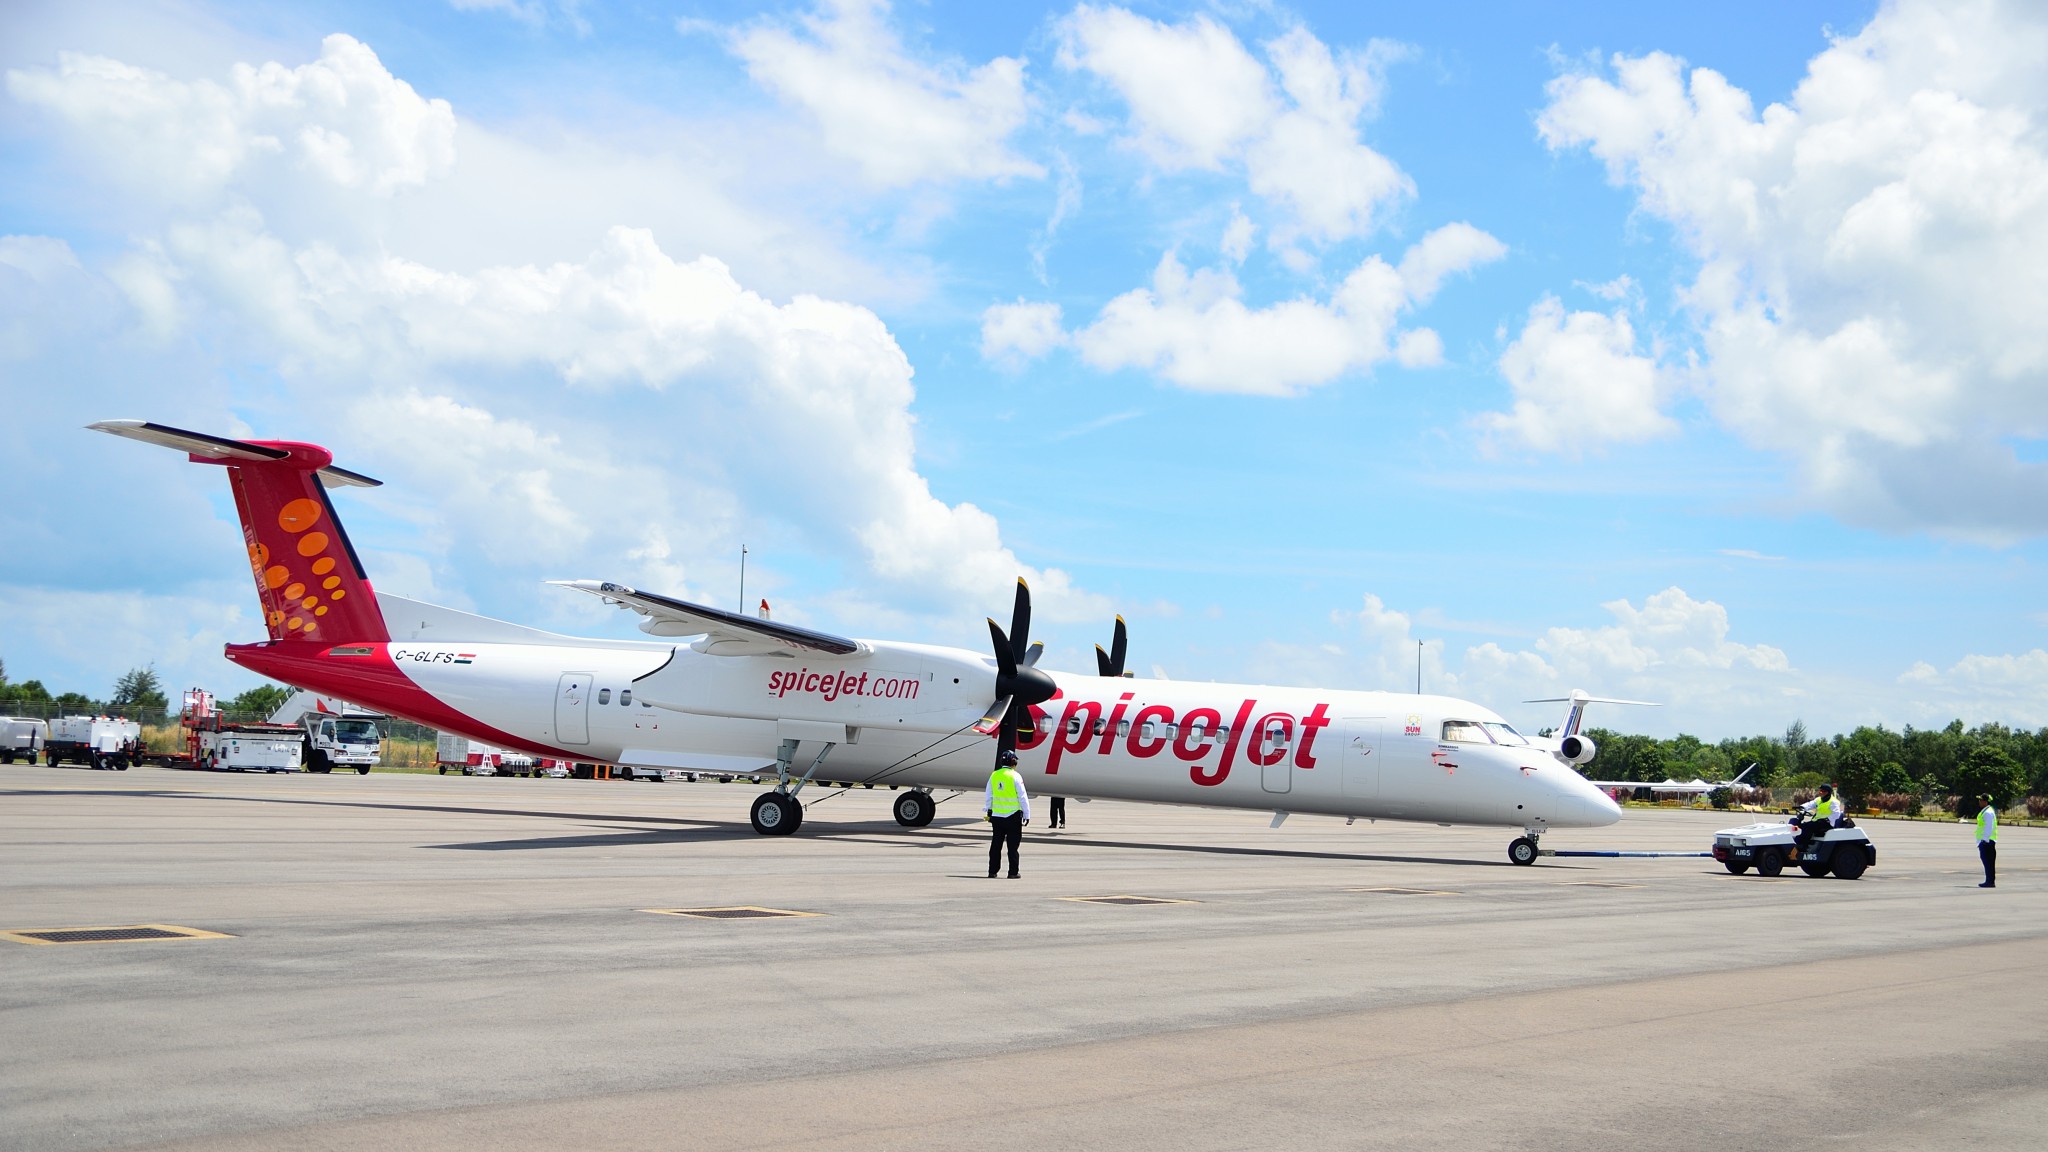 SpiceJet continues expansion plans with addition of 46 new non-stop domestic flights